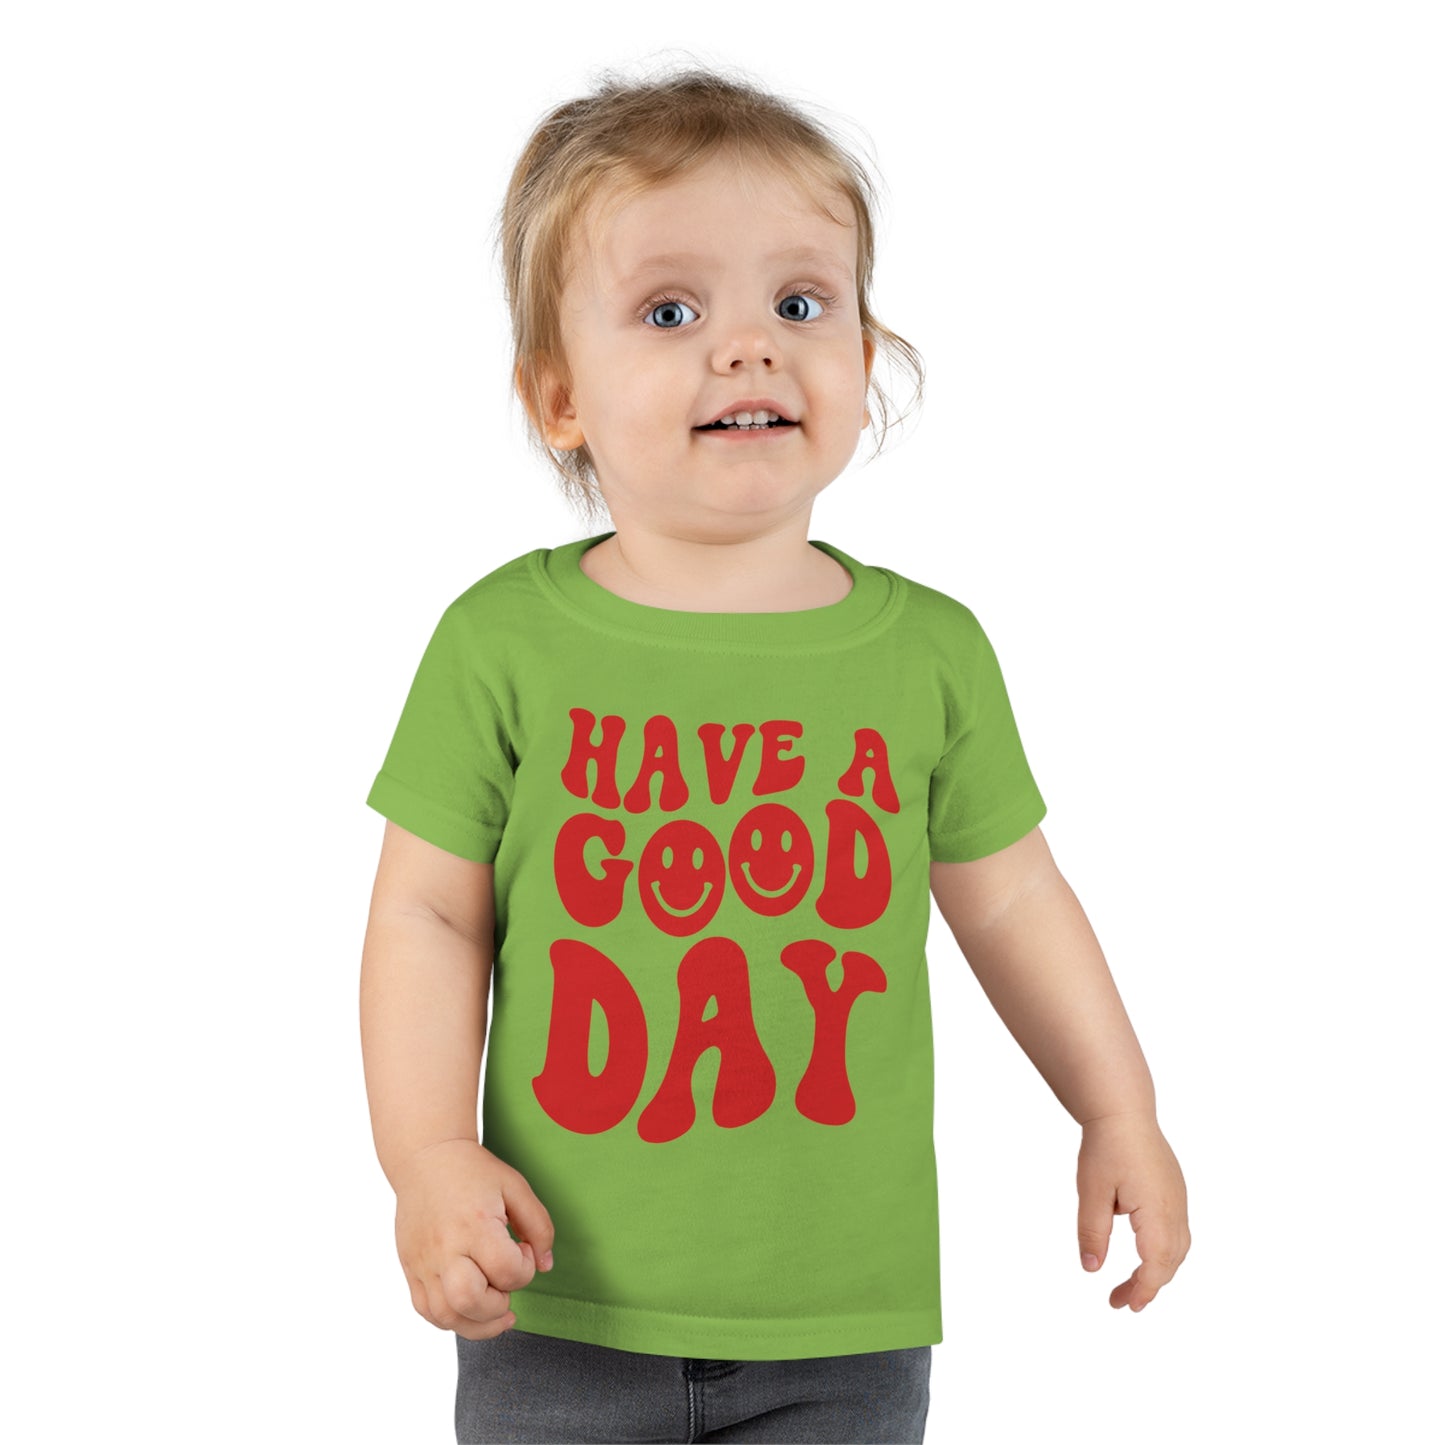 Have a Good Day - Toddler T-shirt